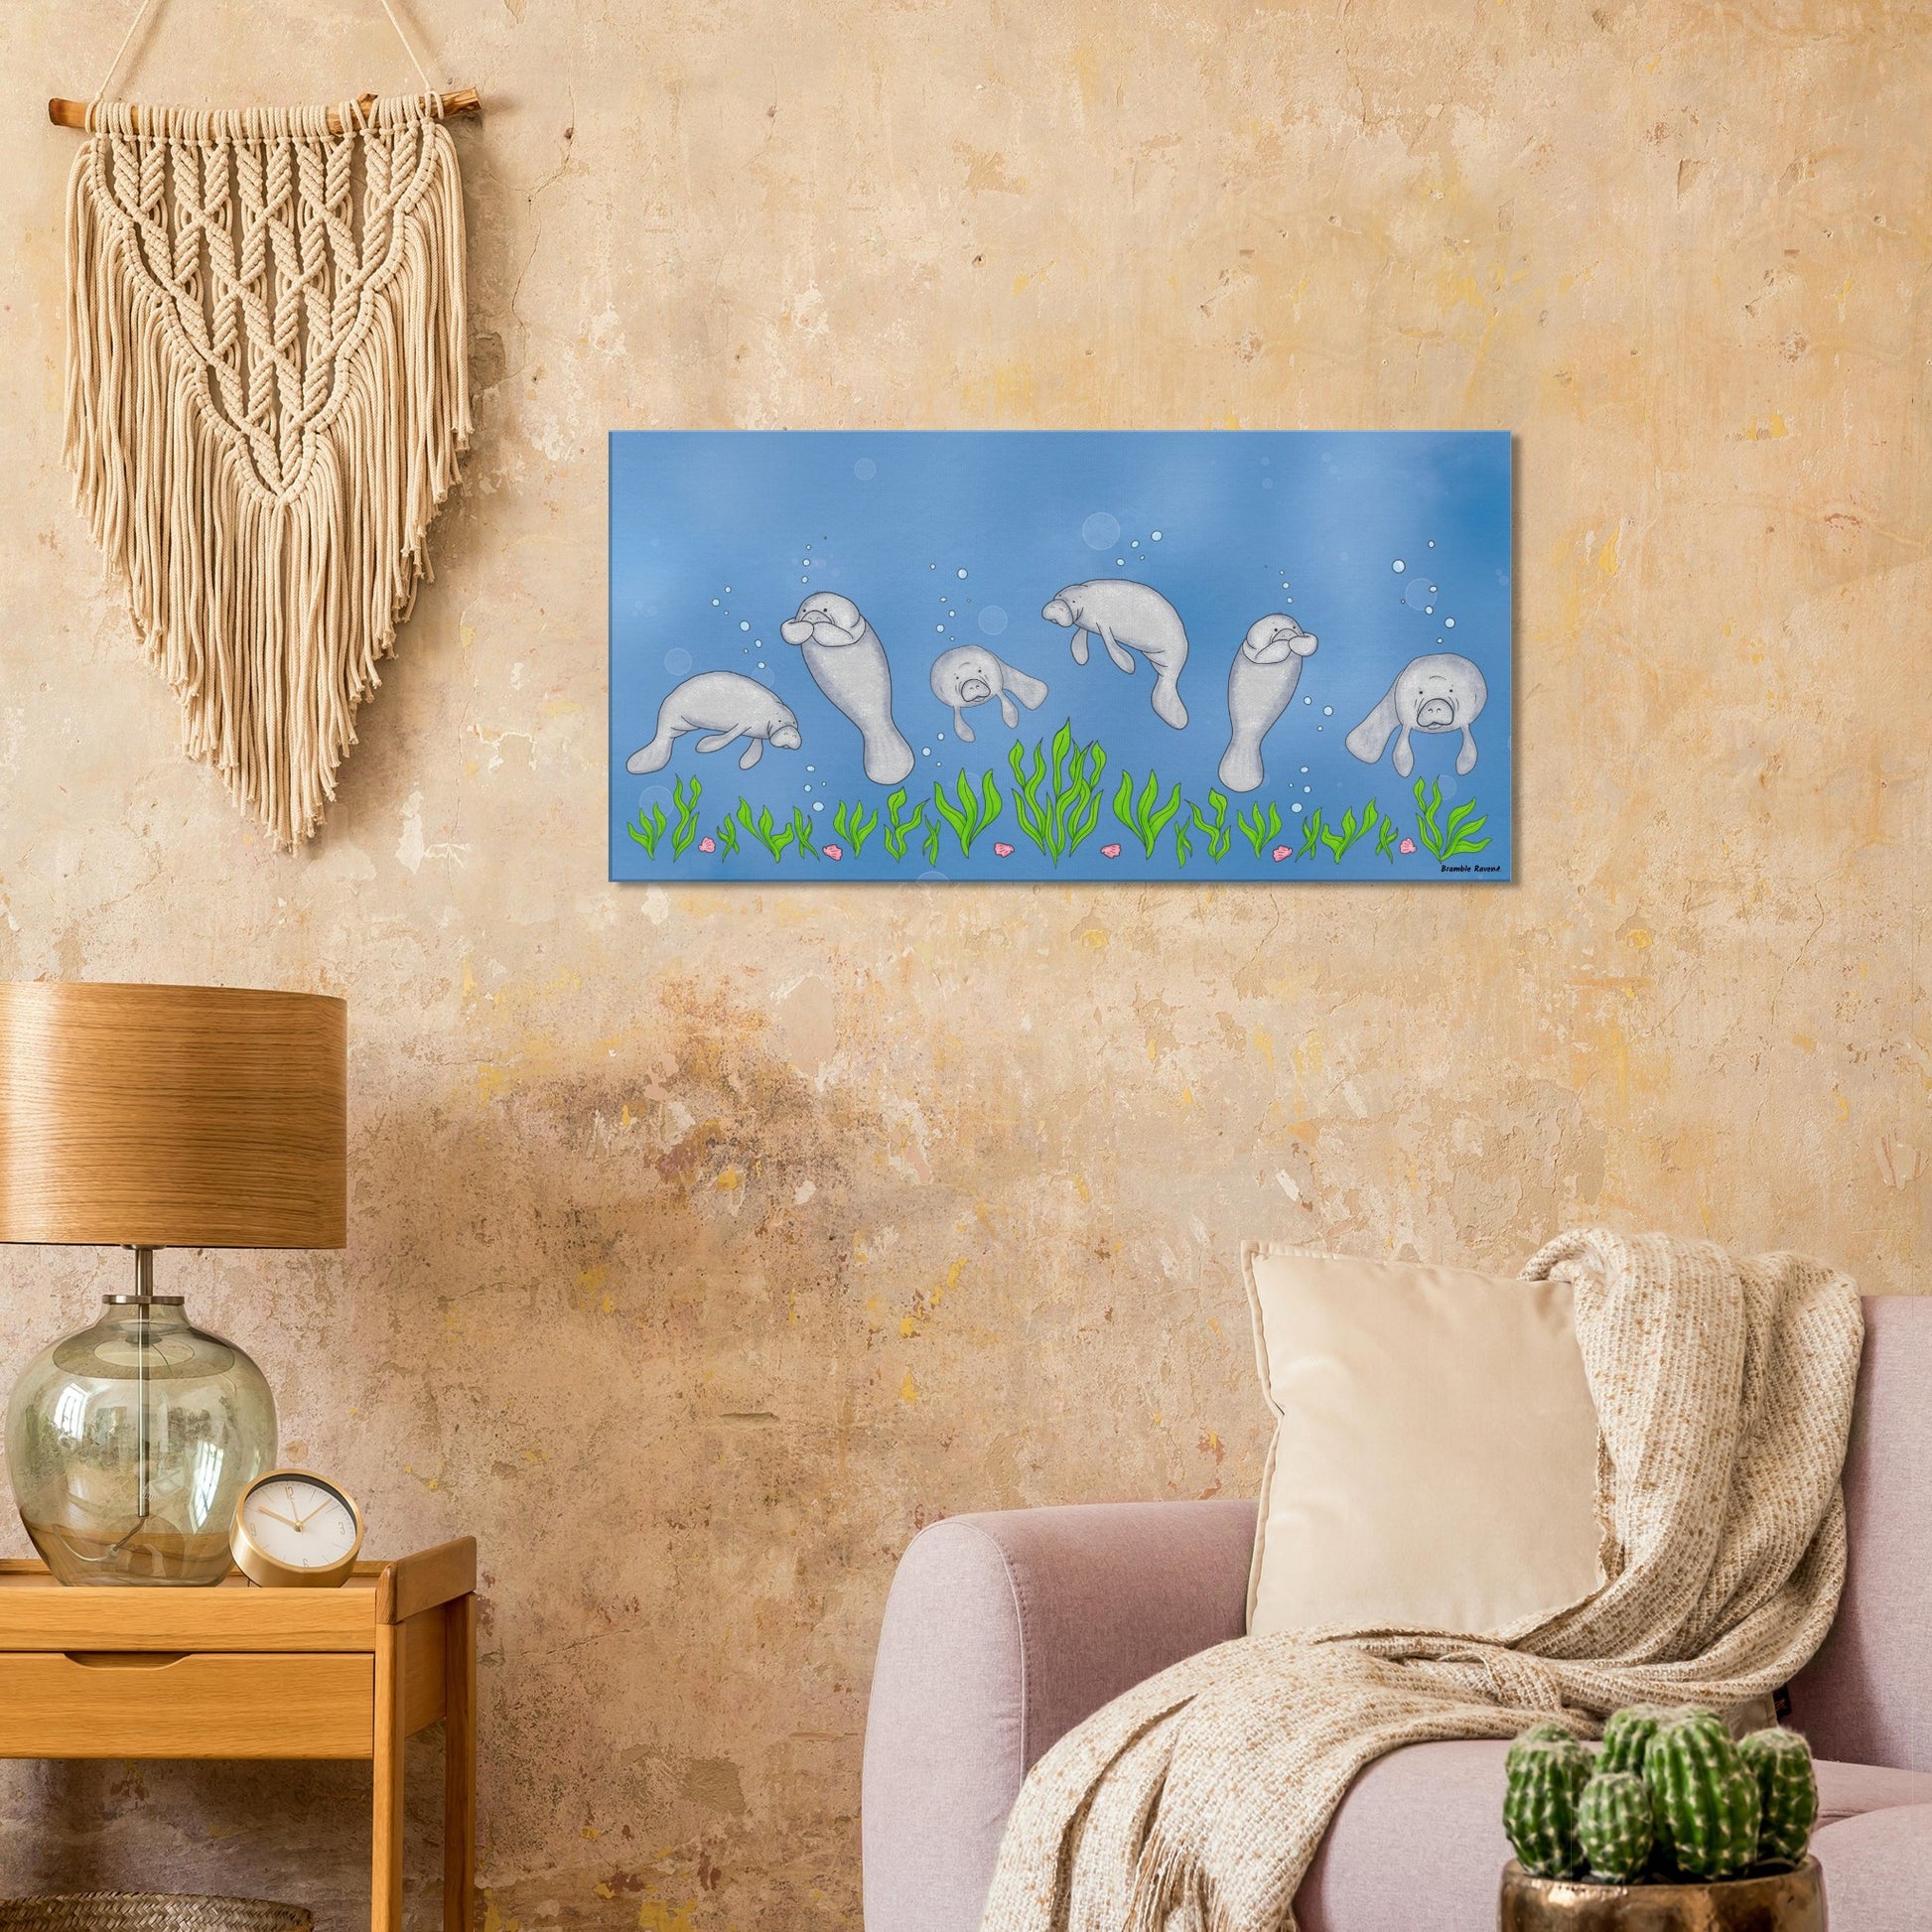 20 by 40 inch slim canvas wall art print featuring cute illustrated manatees swimming above the seabed. Shown on  beige wall by macrame, lamp, wooden end table, and pink sofa.